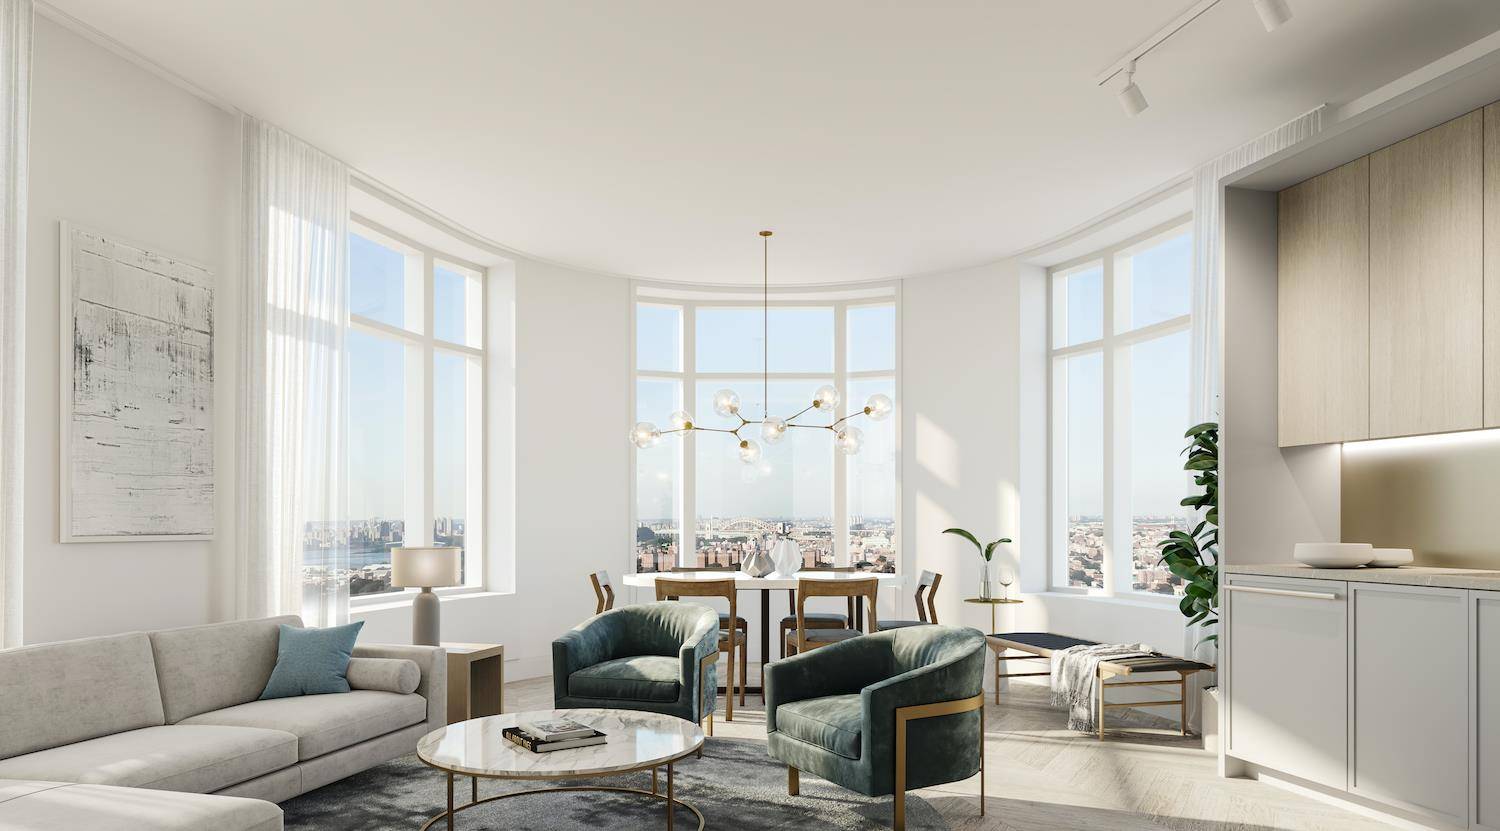 Soaring over park studded Long Island City rises NOVA, a collection of 86 new condominium residences uniquely formed by a remarkable terracotta facade that embodies the bold, stylish character of ...